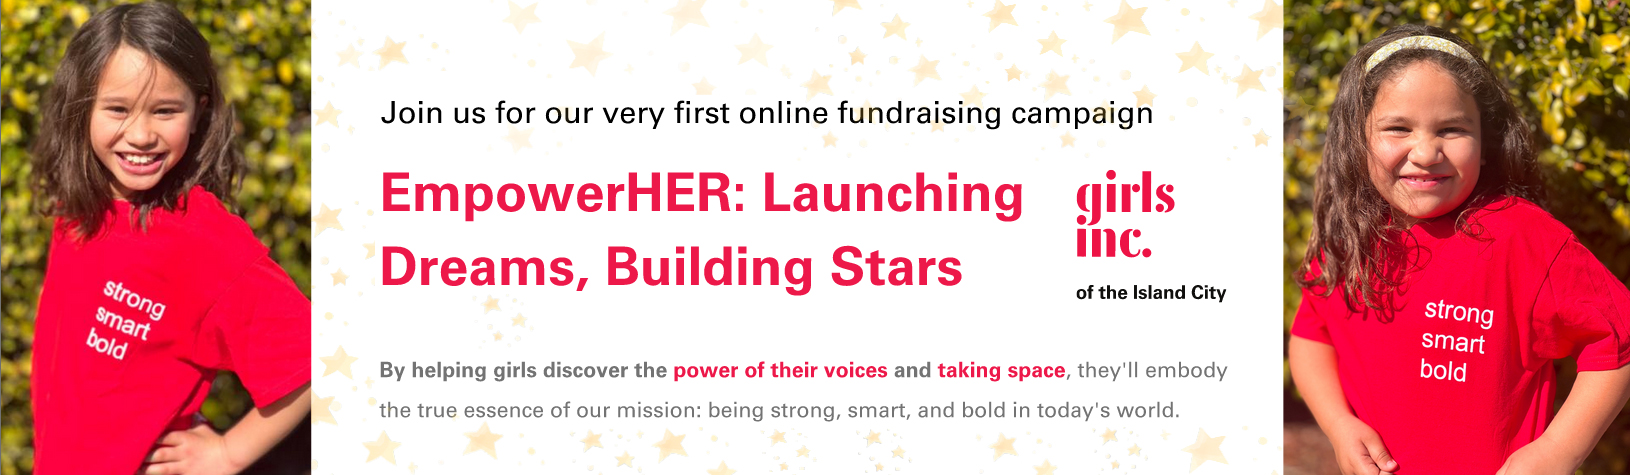 EmpowerHER: Launching Dreams, Building Stars